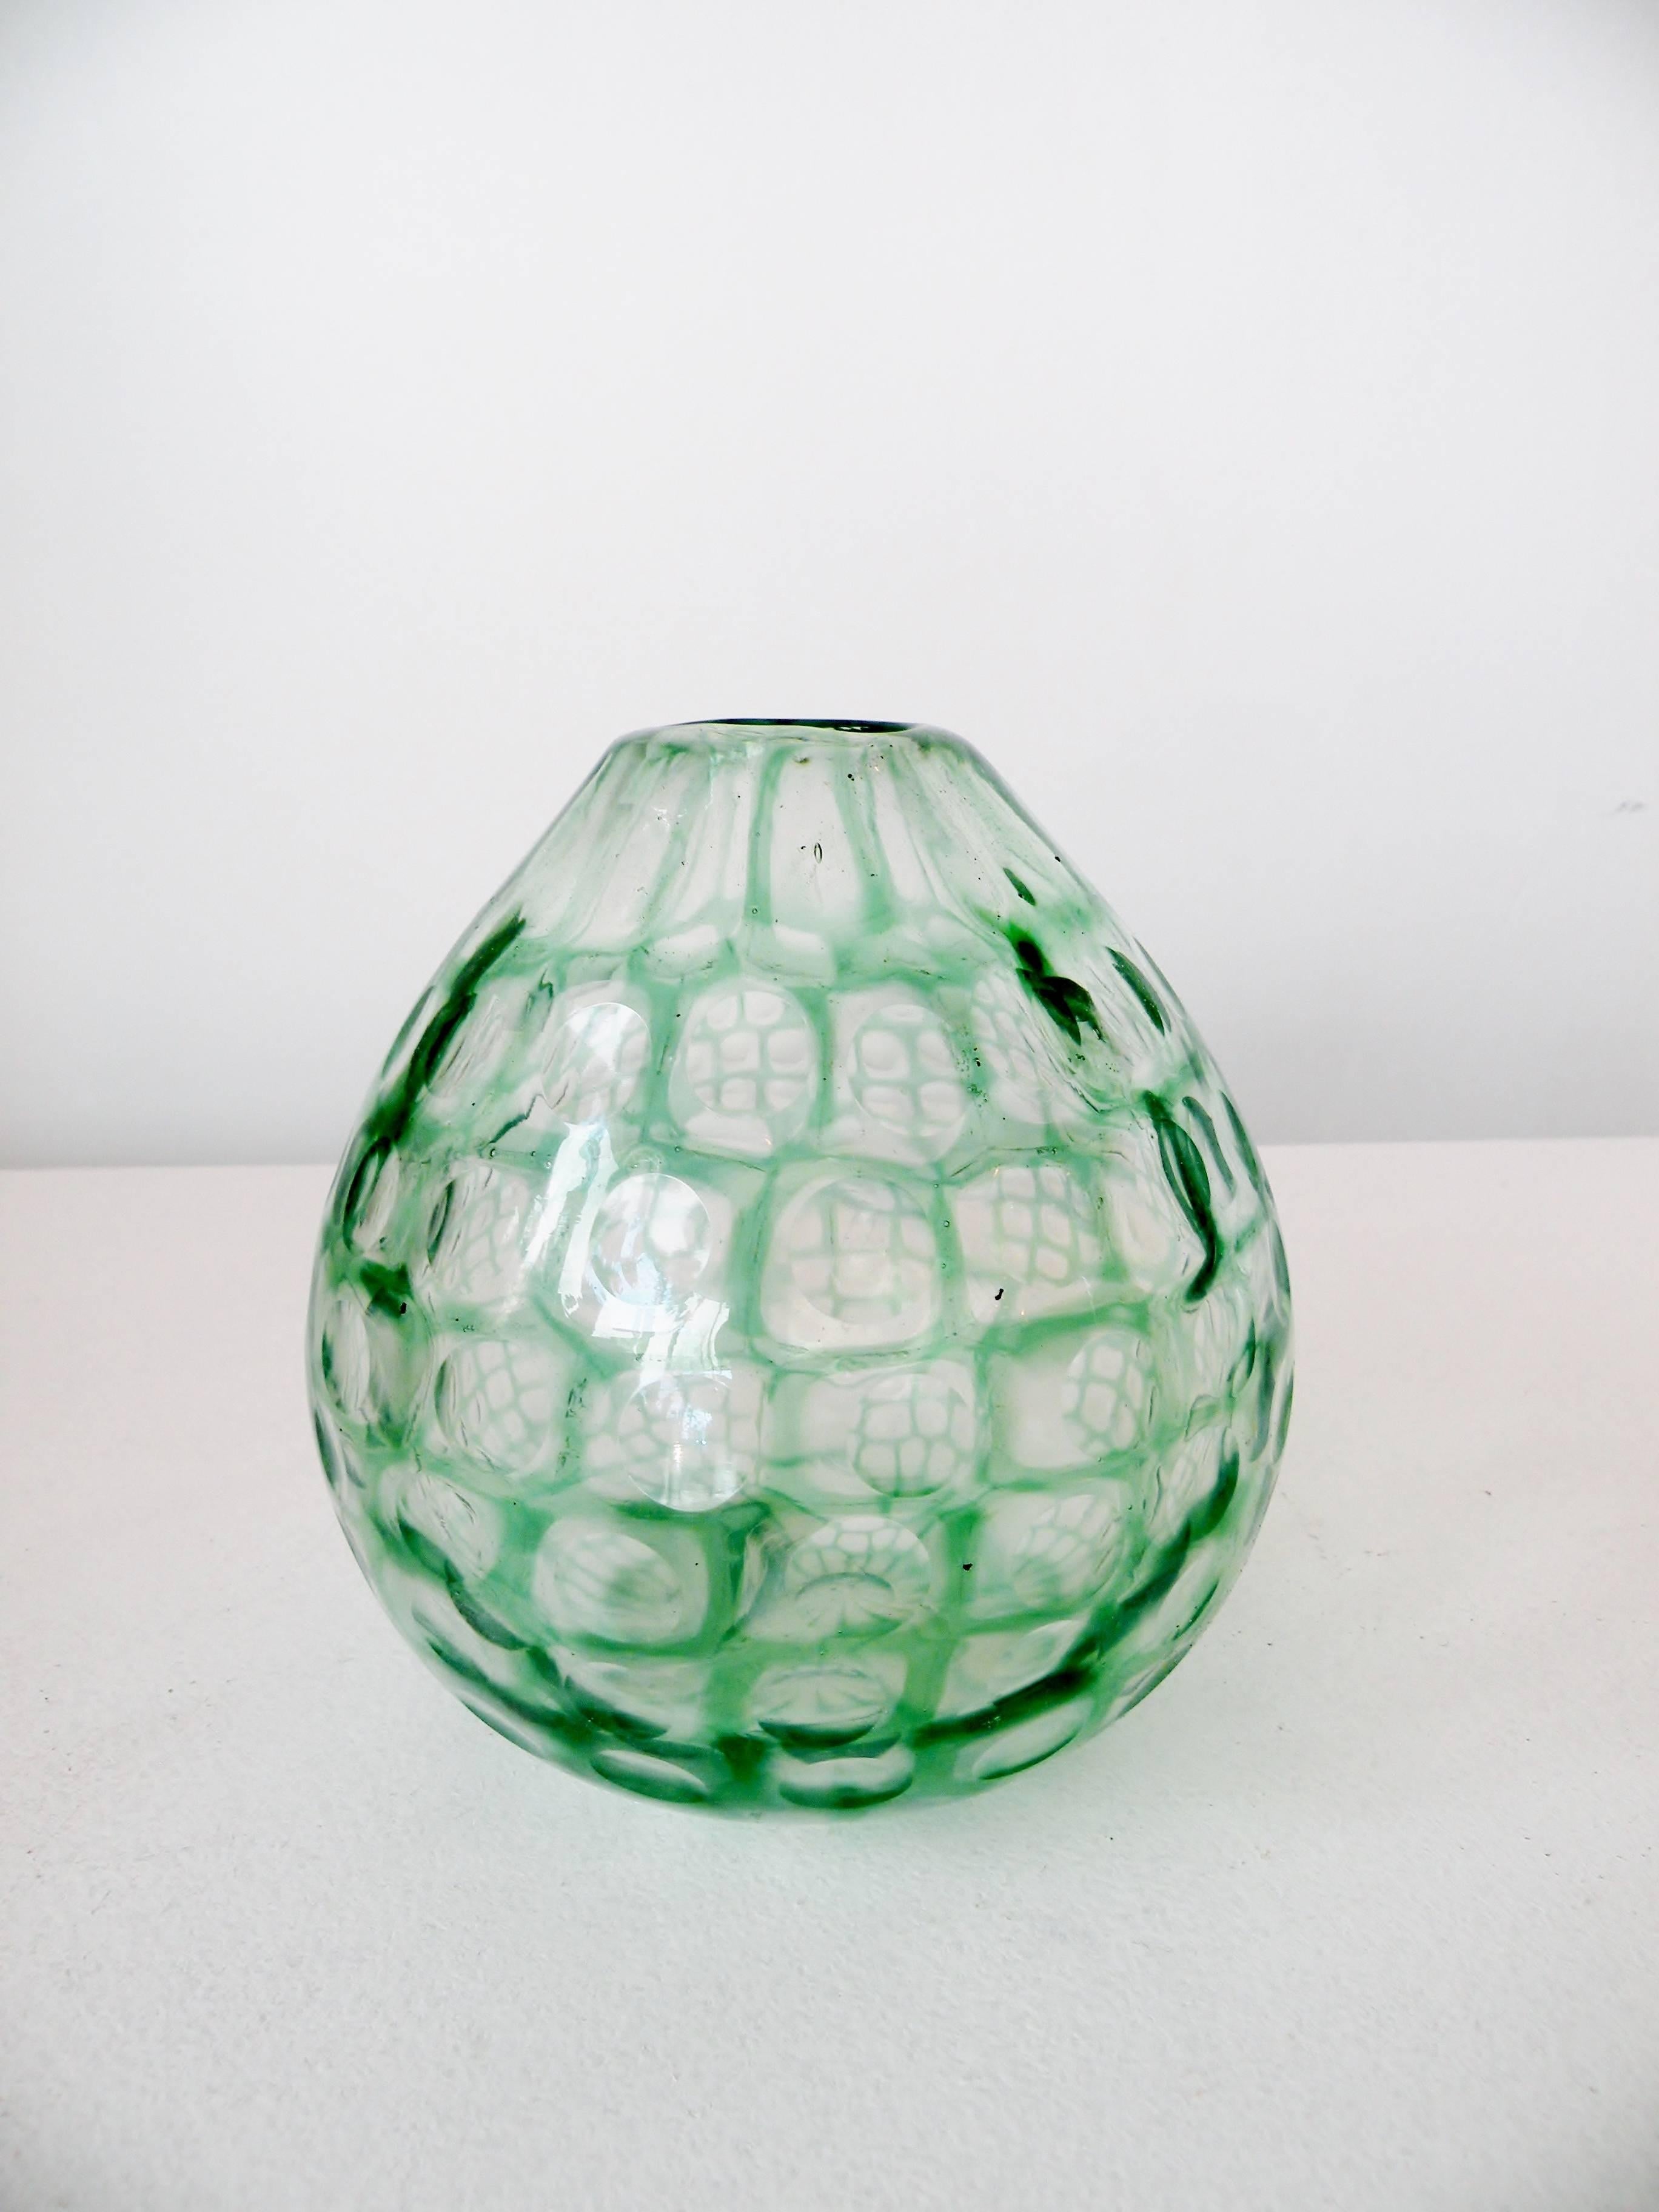 A scarce early 1960s Tobia Scarpa bulbous Occhi series vase. Green and clear art glass with cut disks around surface. Similar examples are illustrated in Le Verre Venini, Deboni, pl. 166.

This has light hard water rings from use to interior